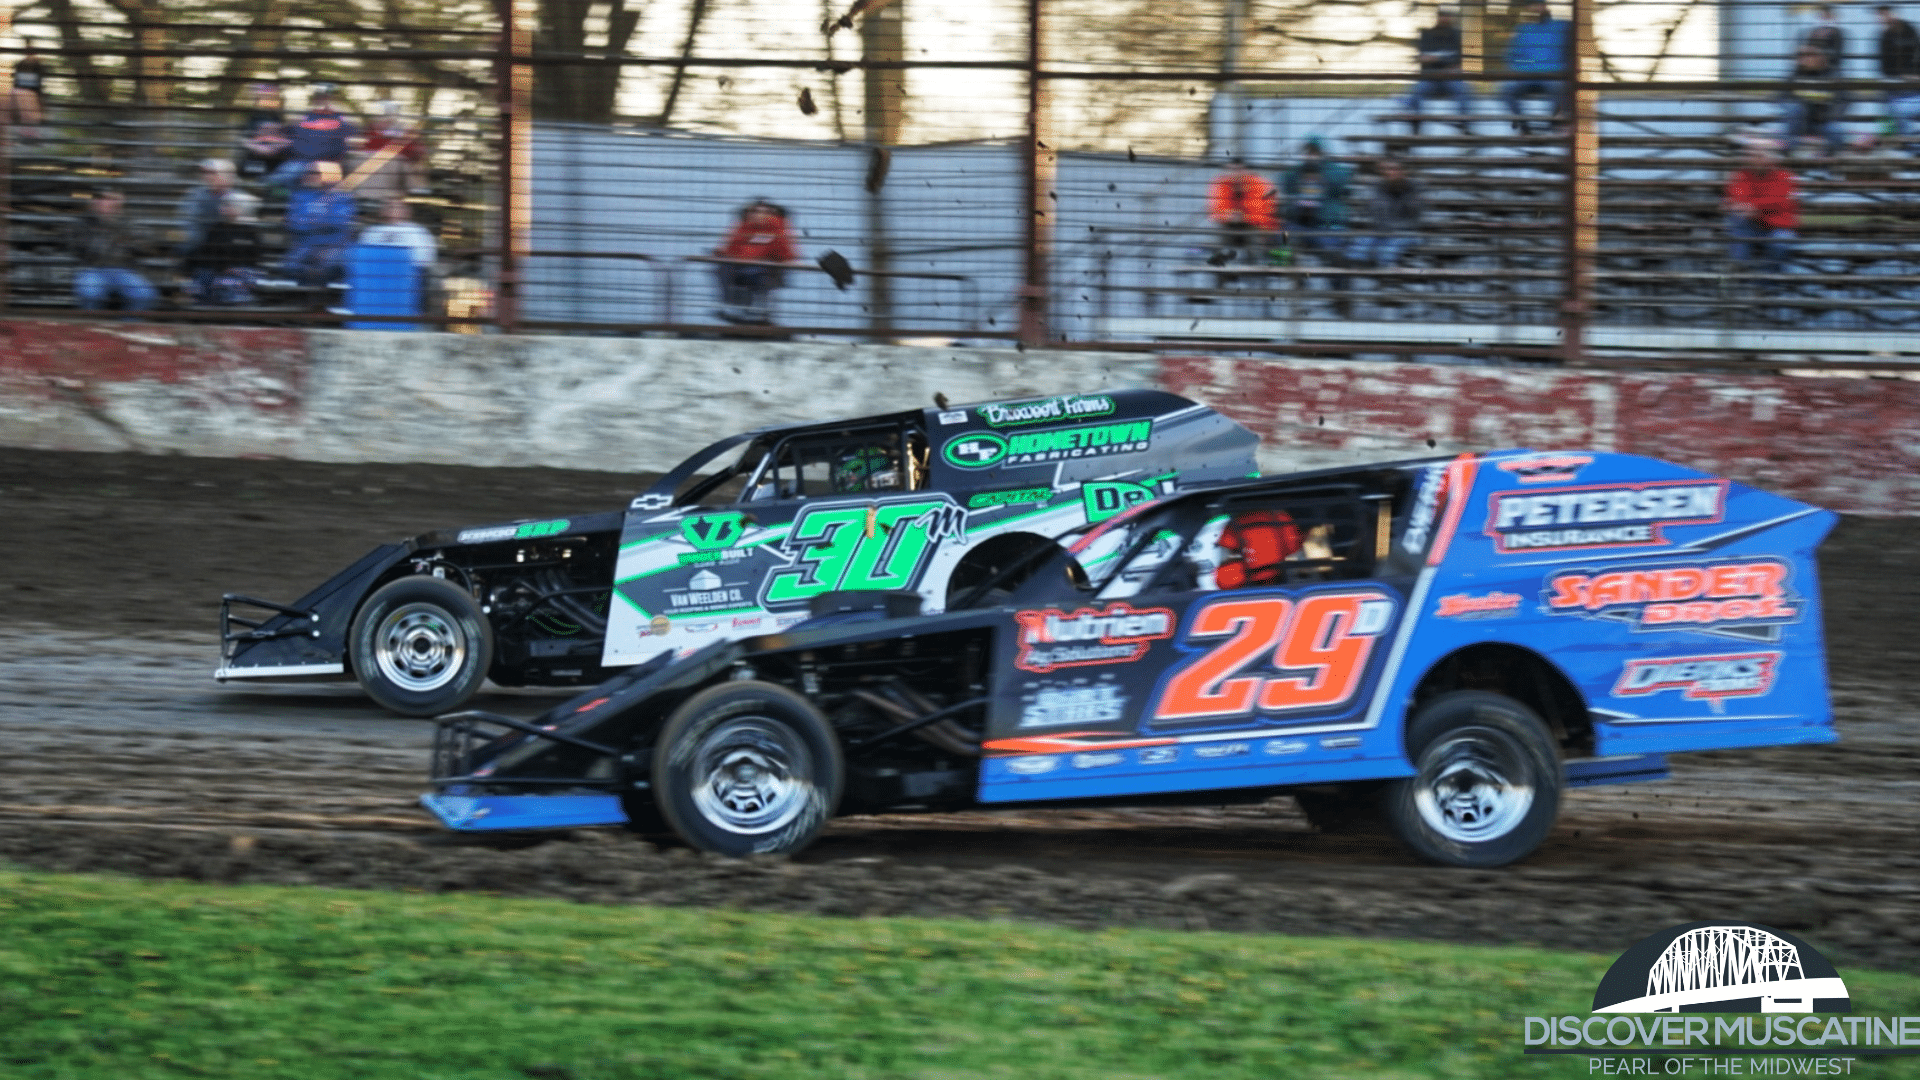 DeJong Undefeated at the West Liberty Raceway Discover Muscatine